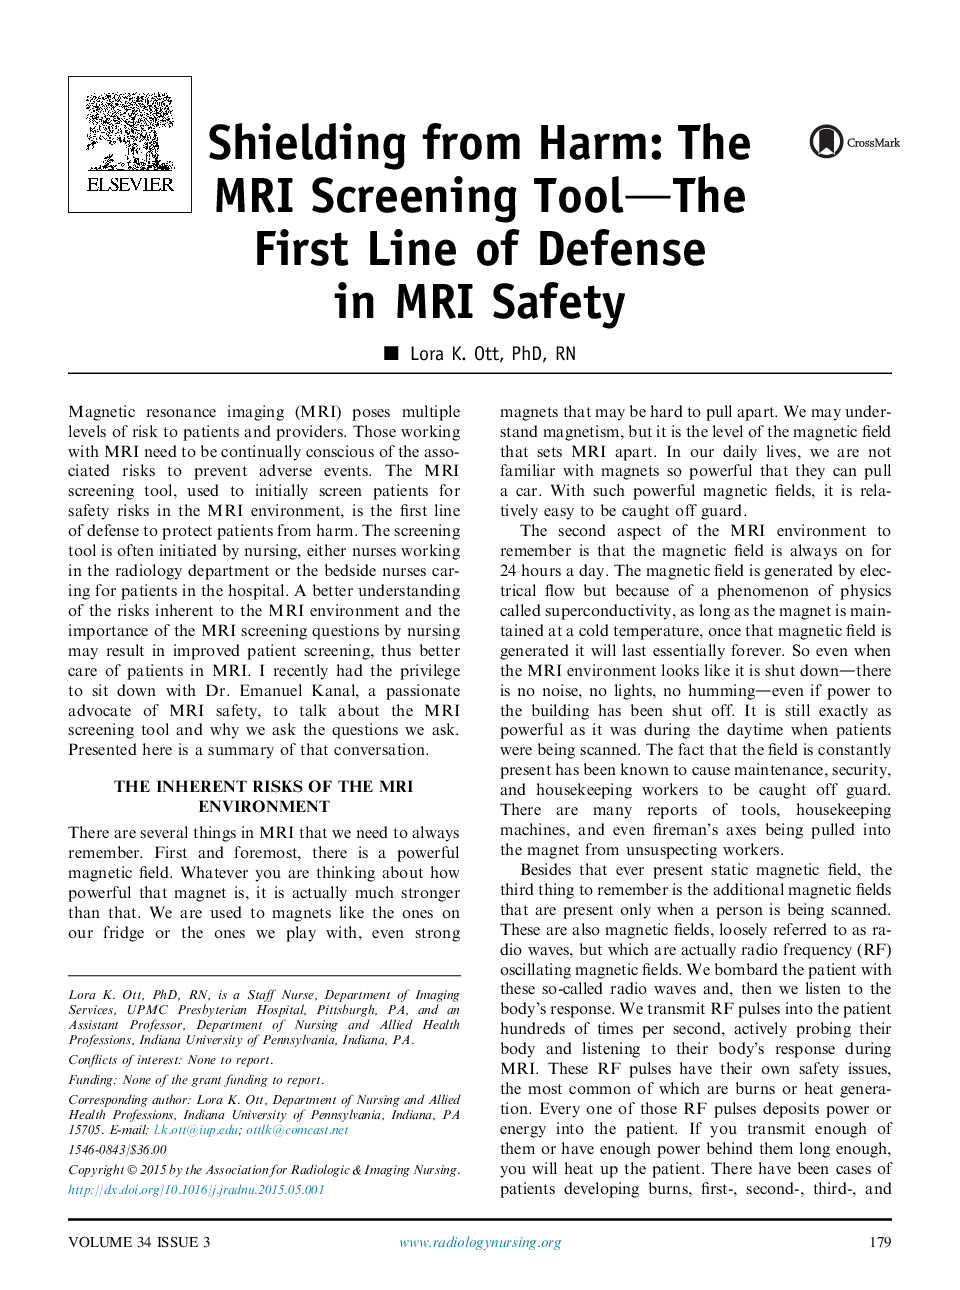 Shielding from Harm: The MRI Screening Tool—The First Line of Defense in MRI Safety 